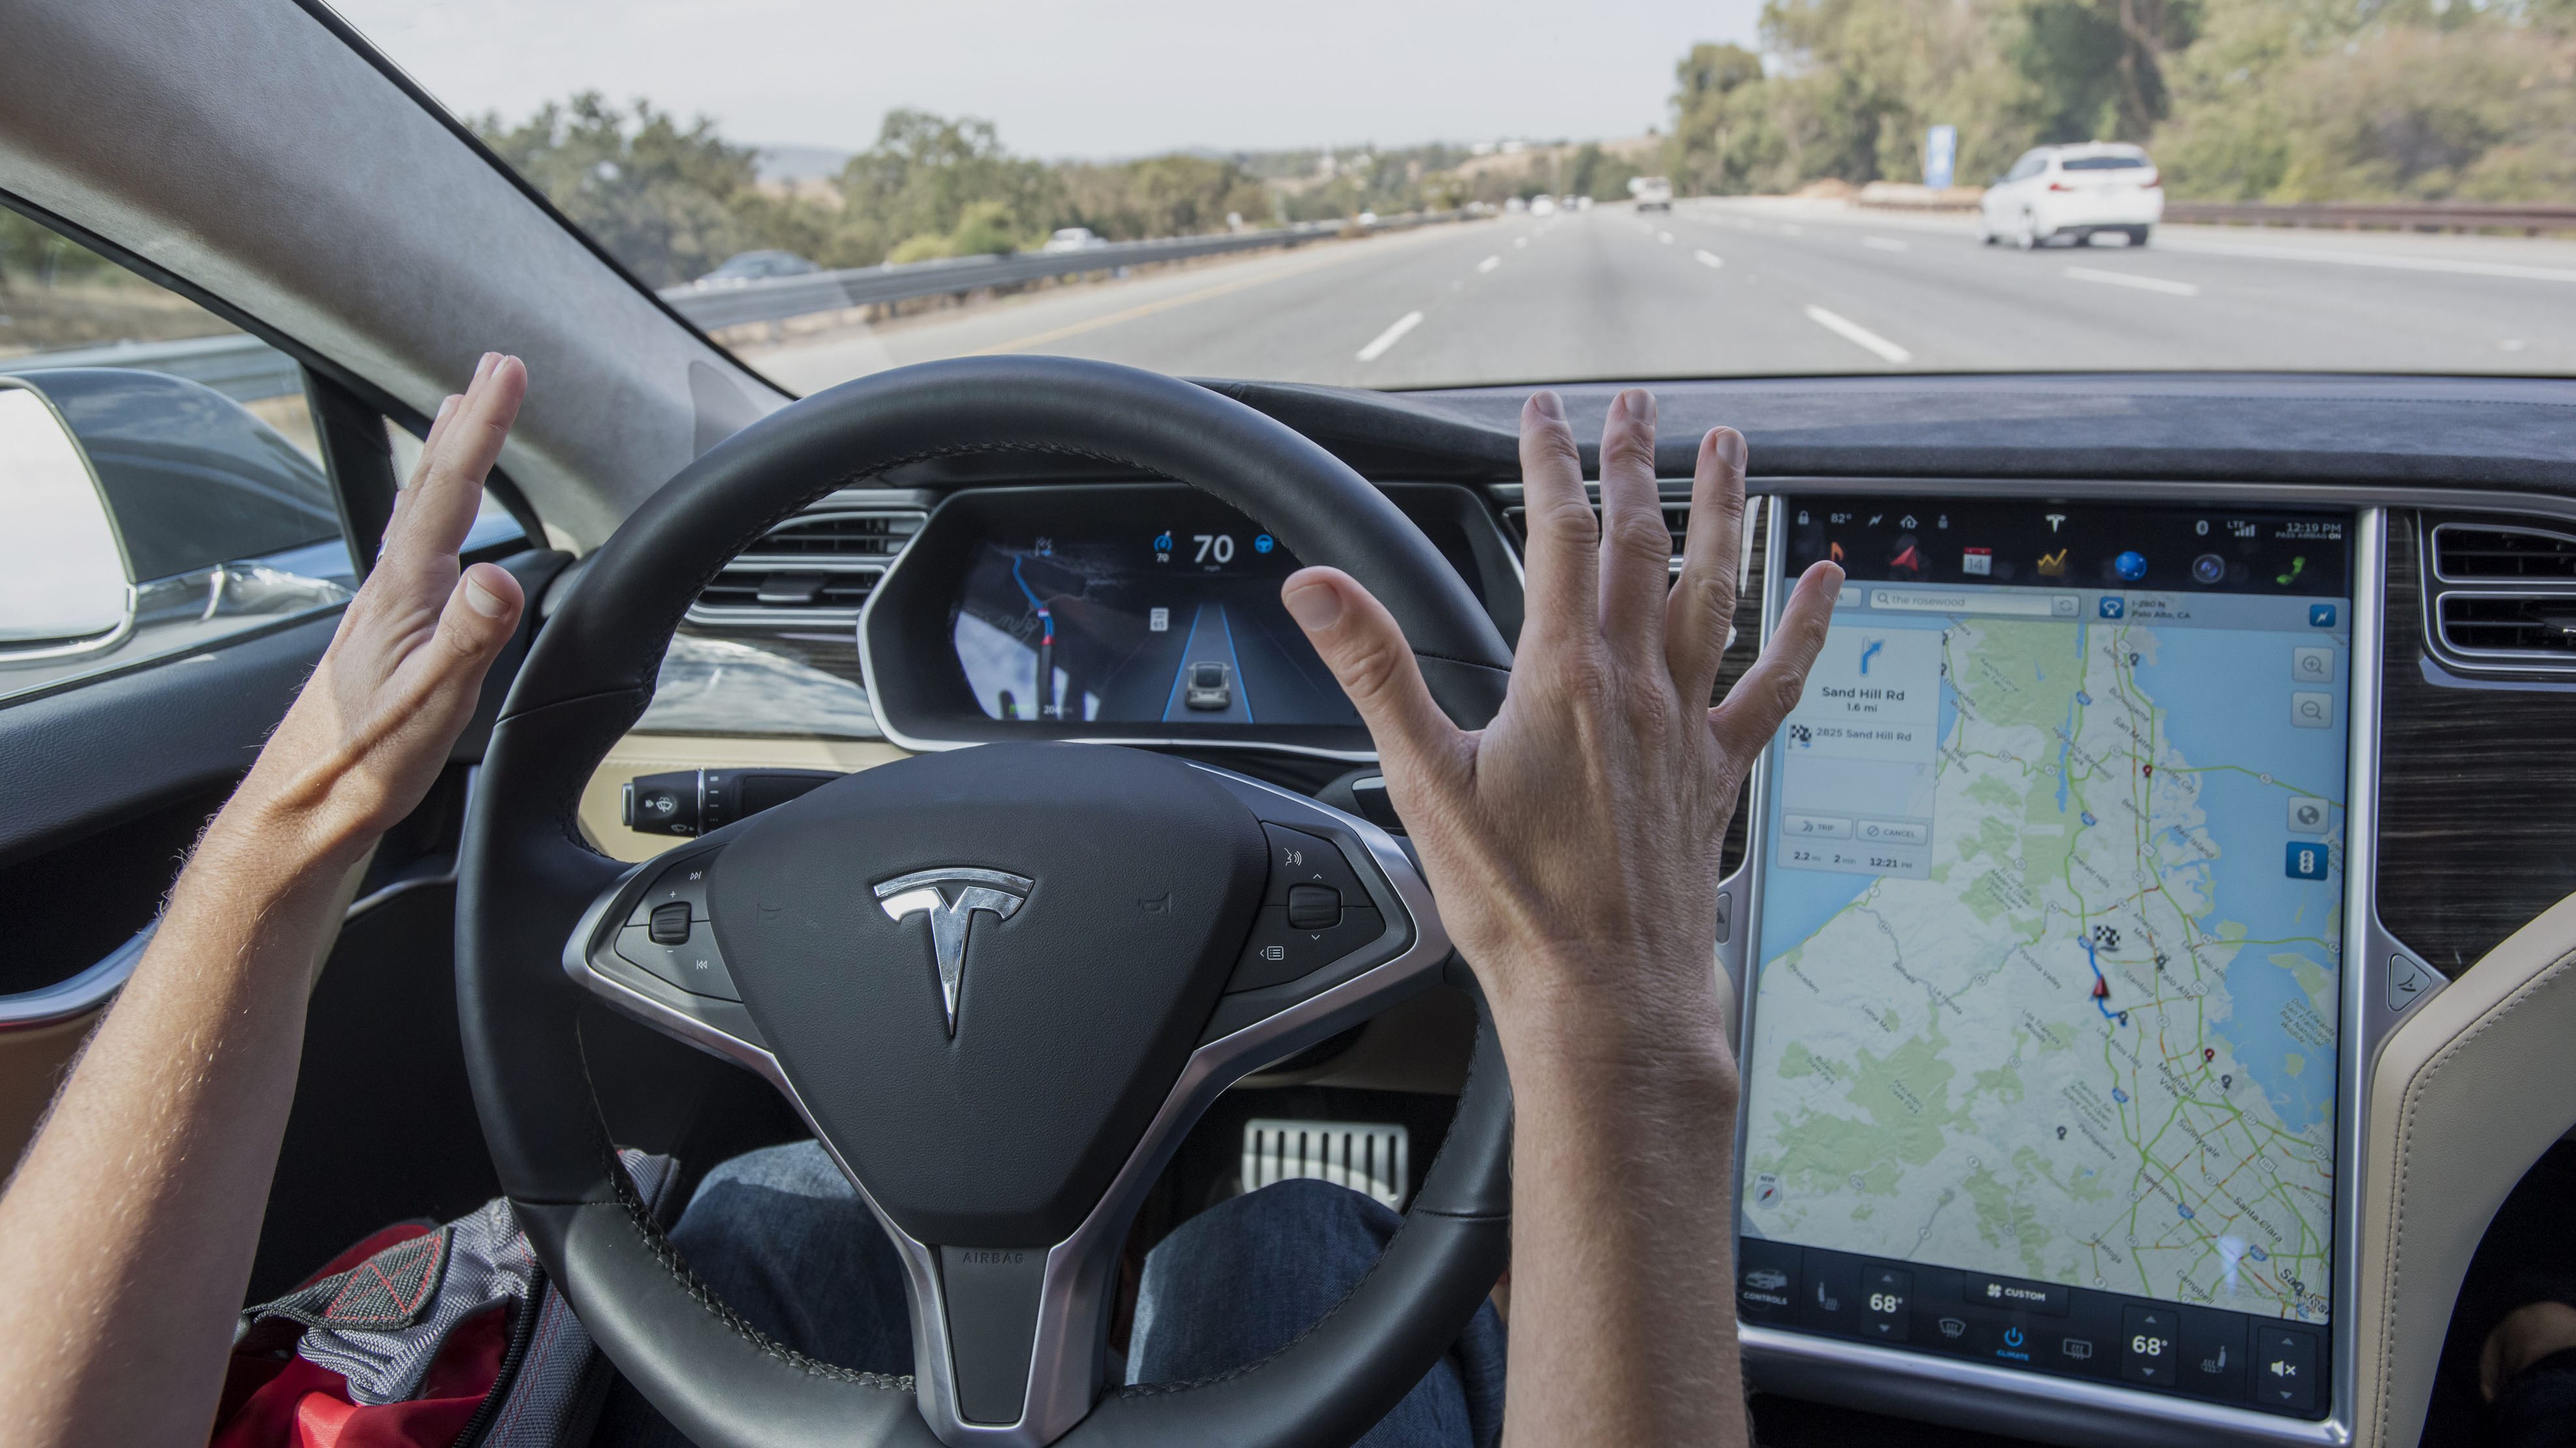 A member of the media test drives a Tesla Motors Inc. Model S car equipped with Autopilot in Palo Alto, California, U.S., on Wednesday, Oct. 14, 2015. (David Paul Morris/Bloomberg via Getty Images)